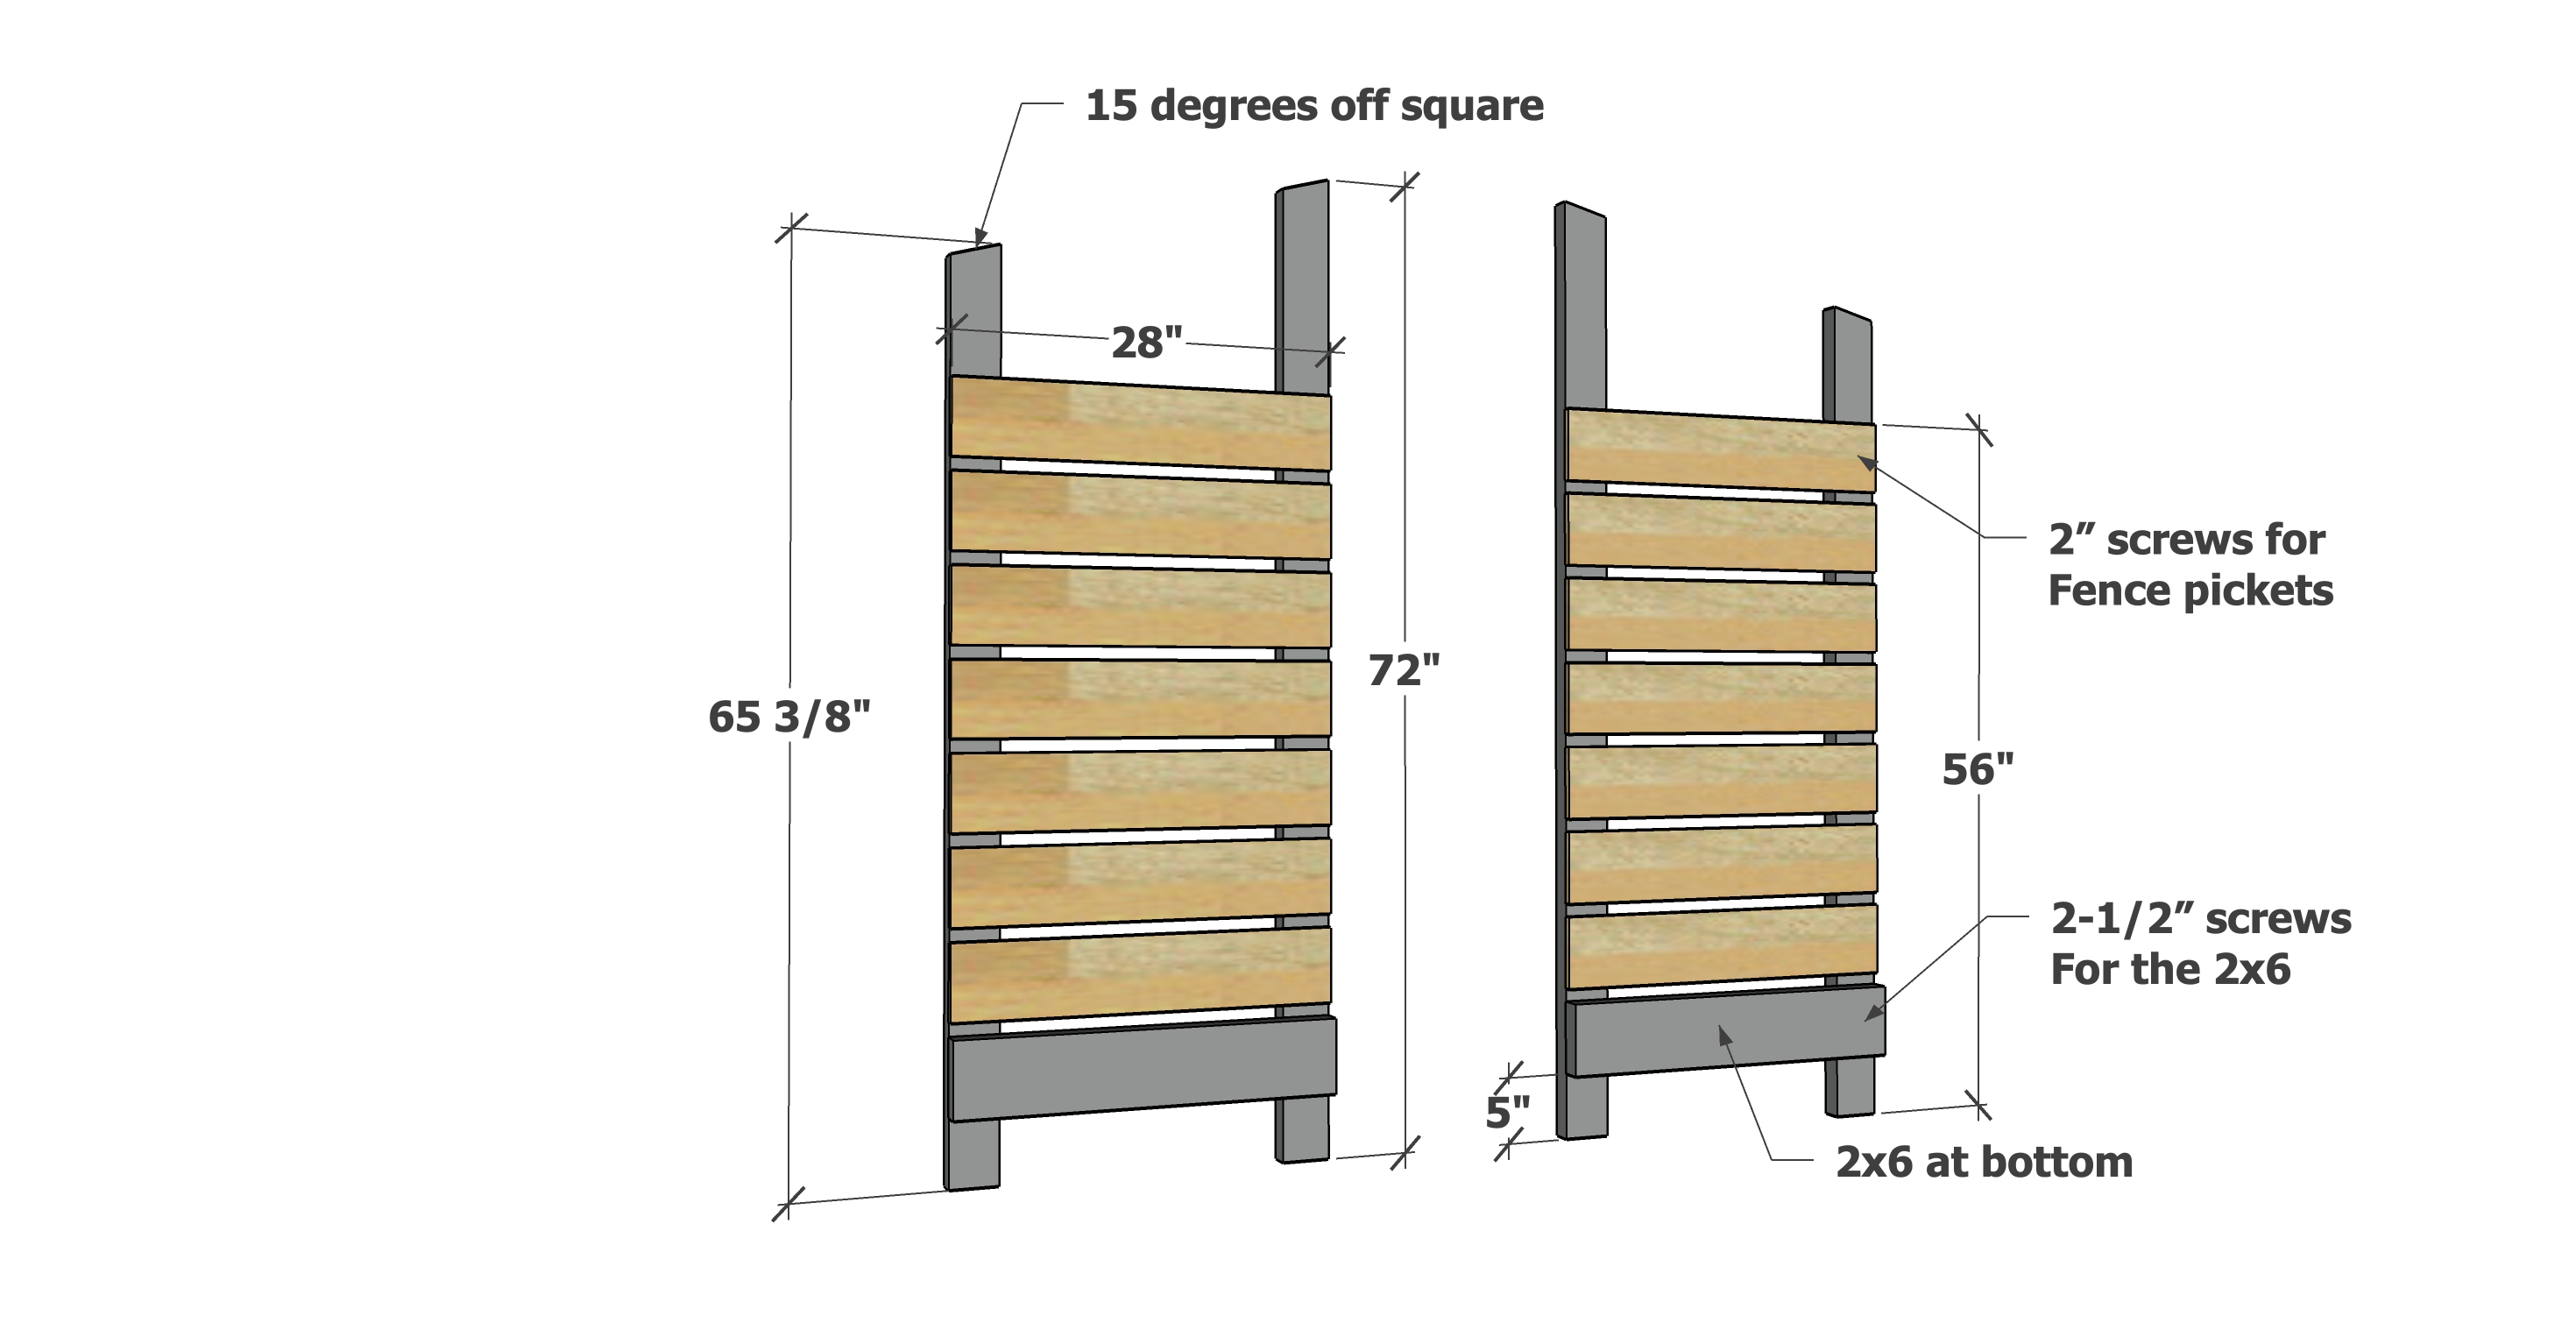 Small Firewood Shed Plans